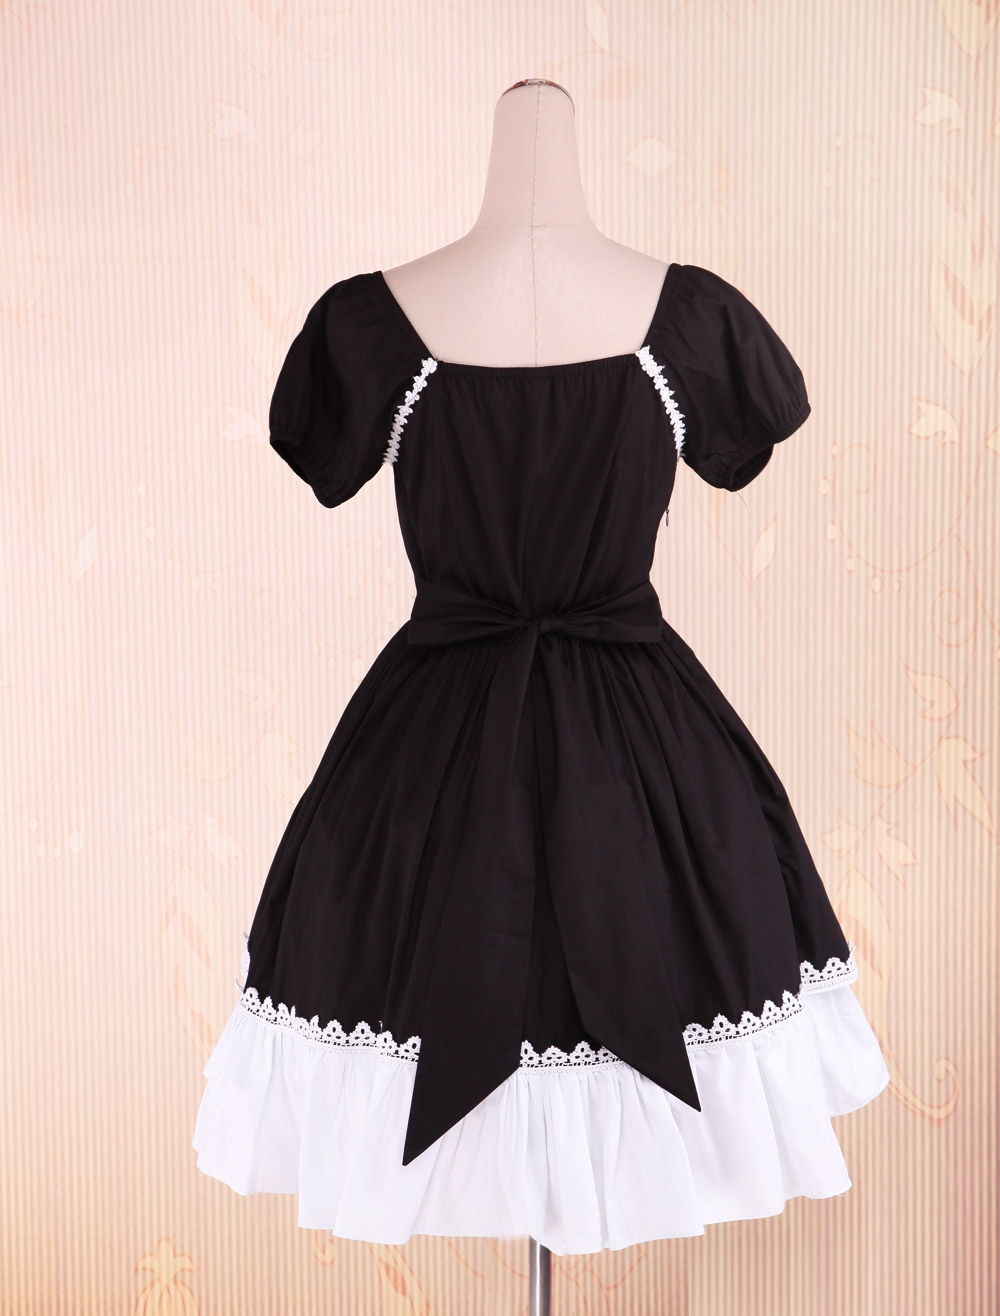 Classic Cotton Black And White Short Sleeves Gothic Lolita Dress ...